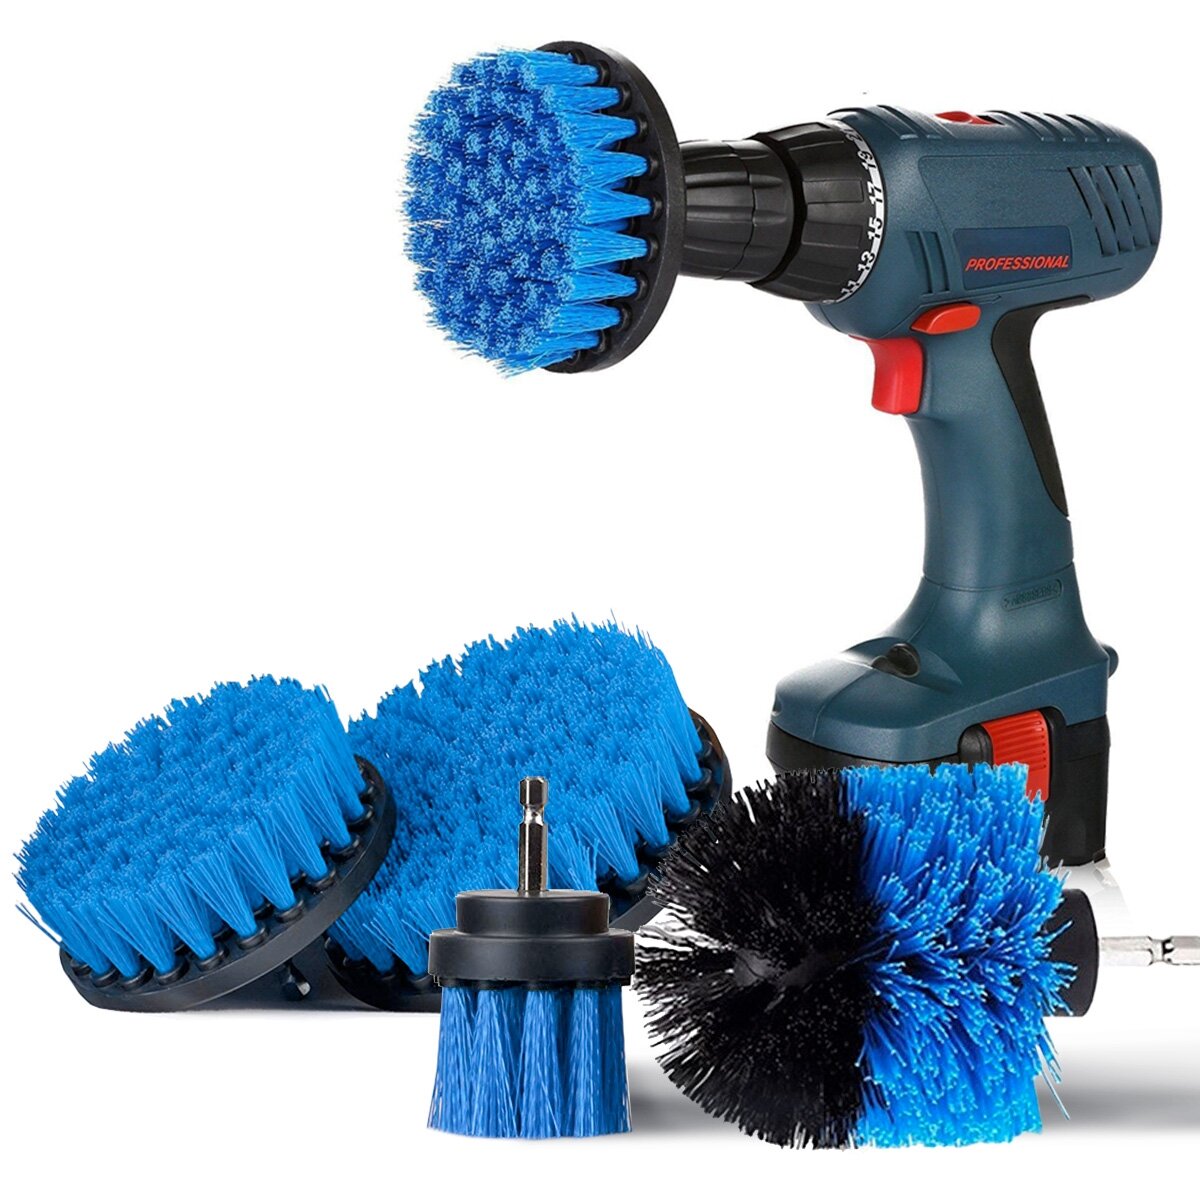 SAFETYON 4 Pieces Drill Brush Attachment Electric Drill Brushes for Cleaning Pool Tile Flooring Brick Ceramic Marble Gro